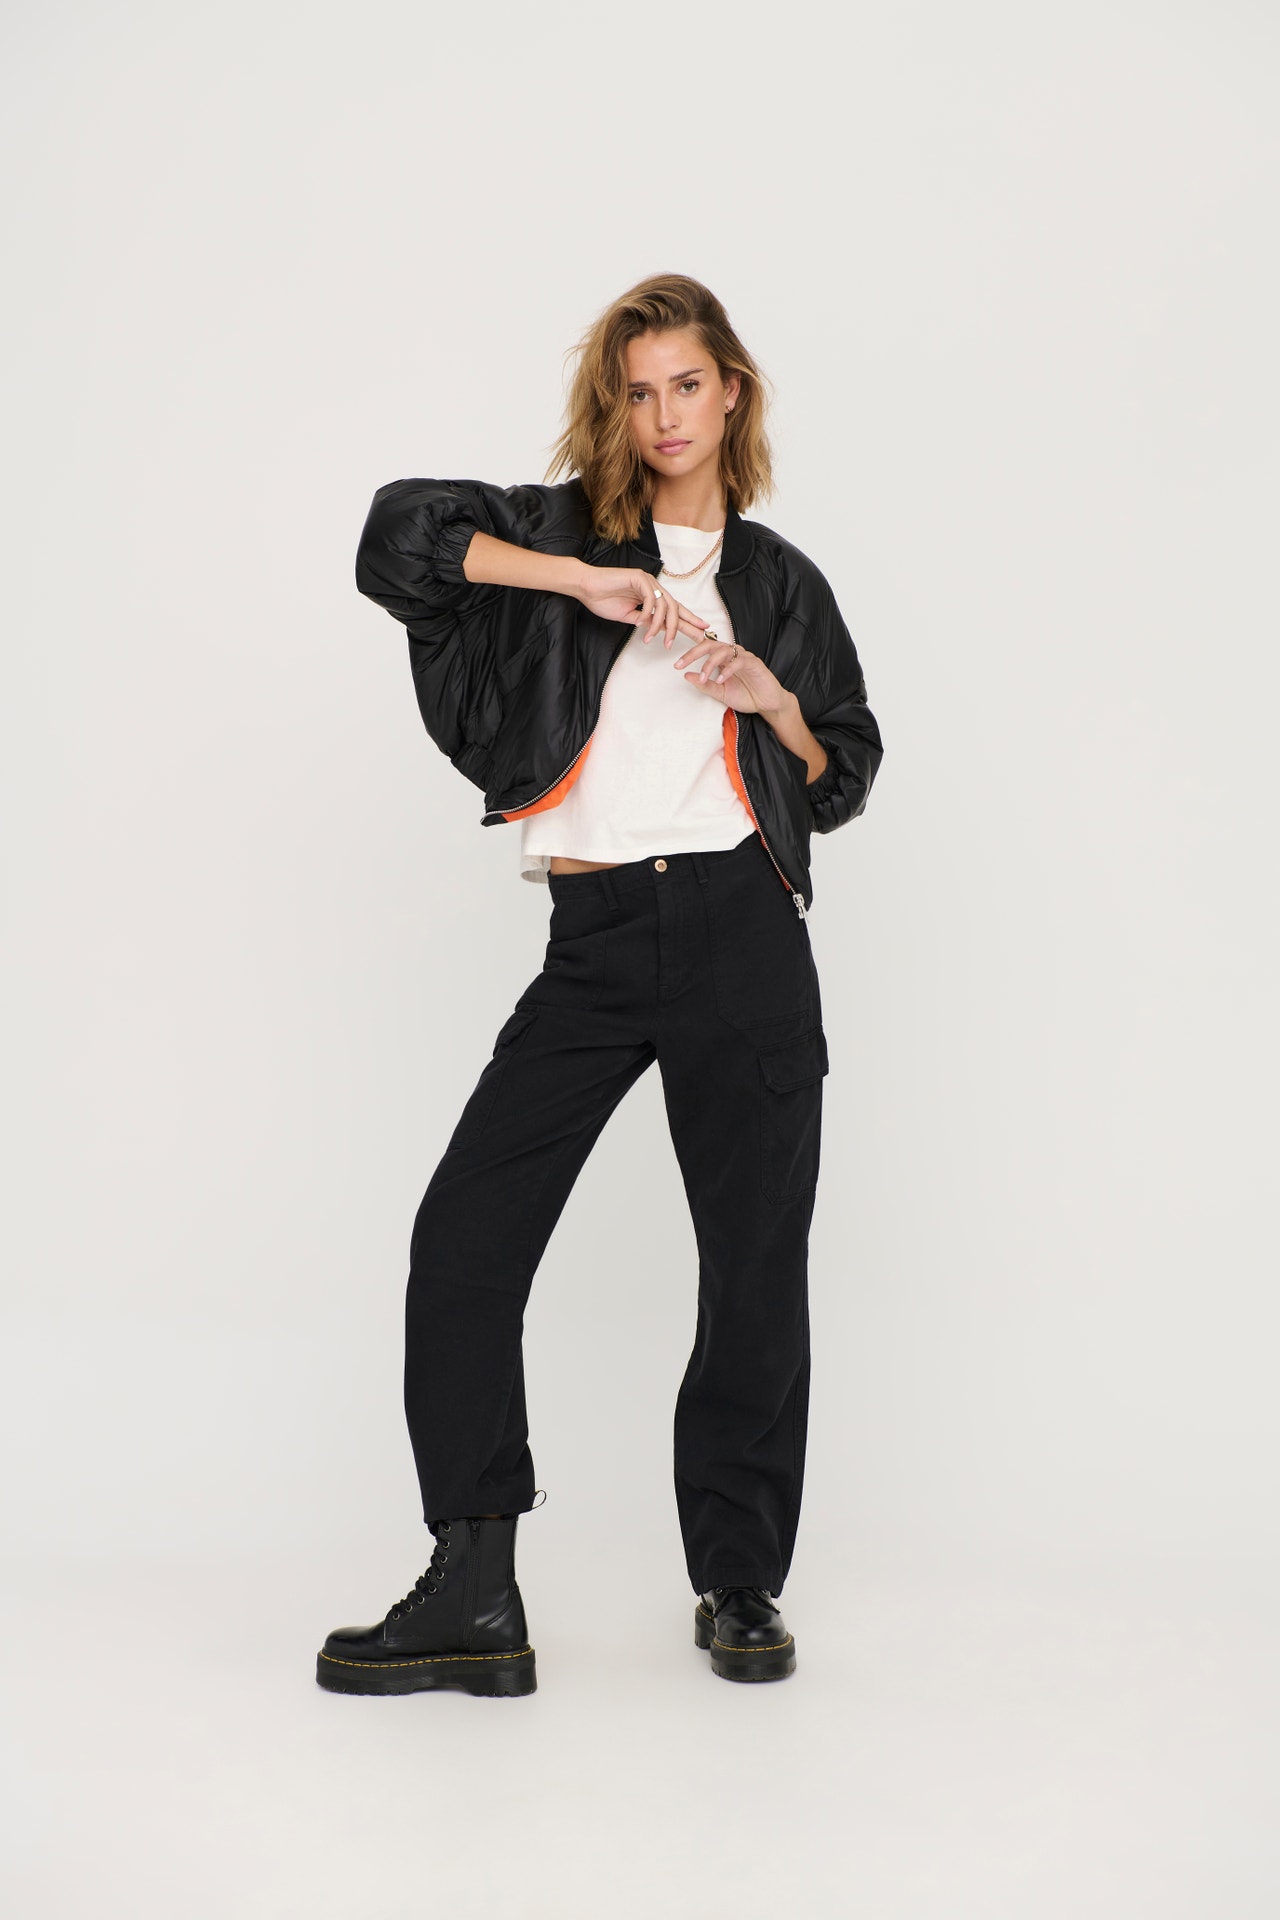 ONLY Loose fit cargo pants with high waist -Black - 15300976